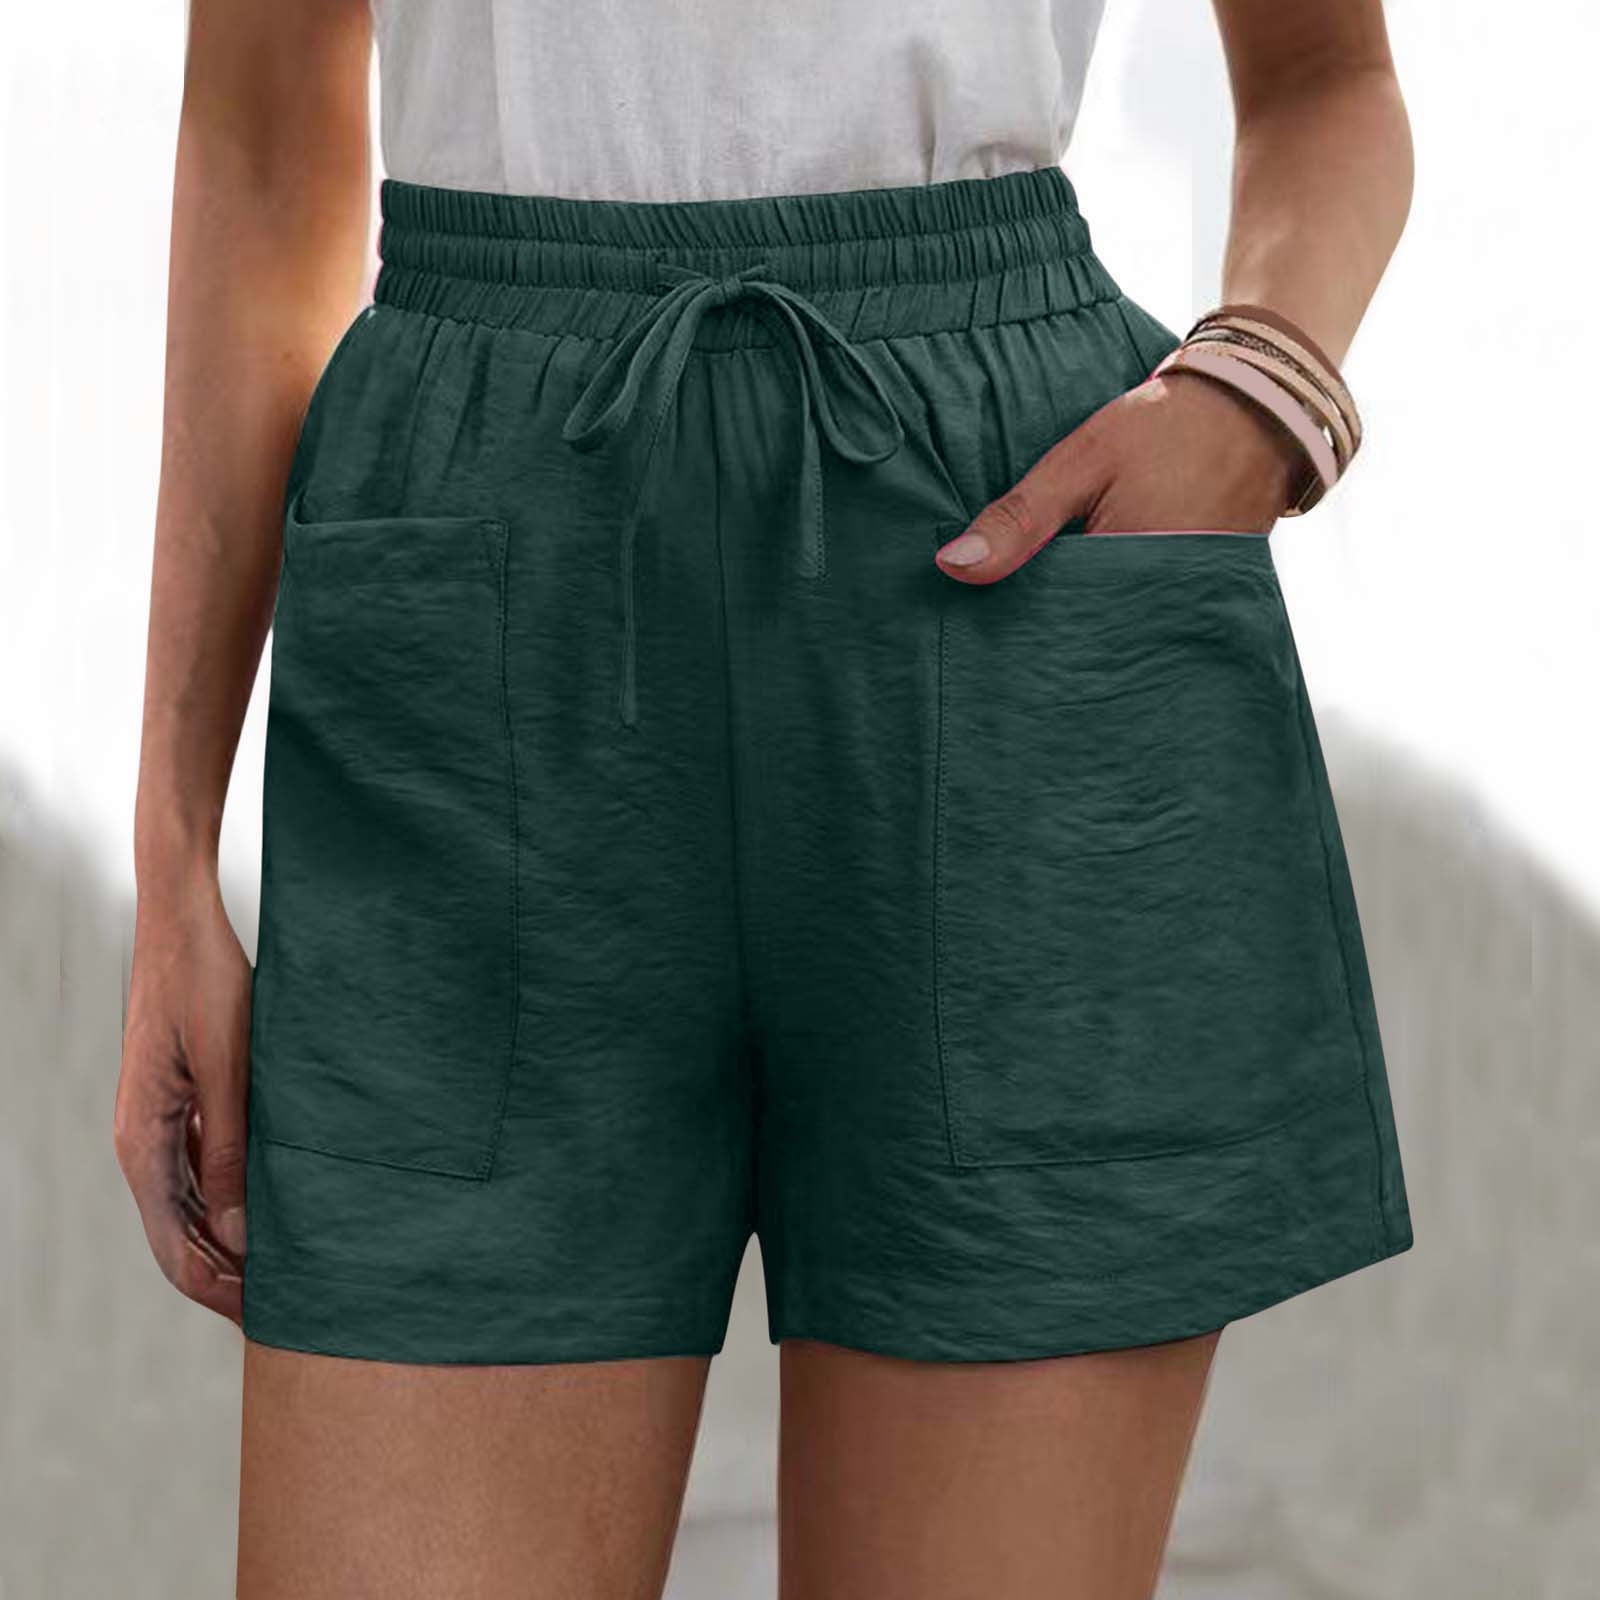 Womens Shorts for Summer,Women's Modest Loose Elastic Waisted Lace Drawstring Casual Shorts 